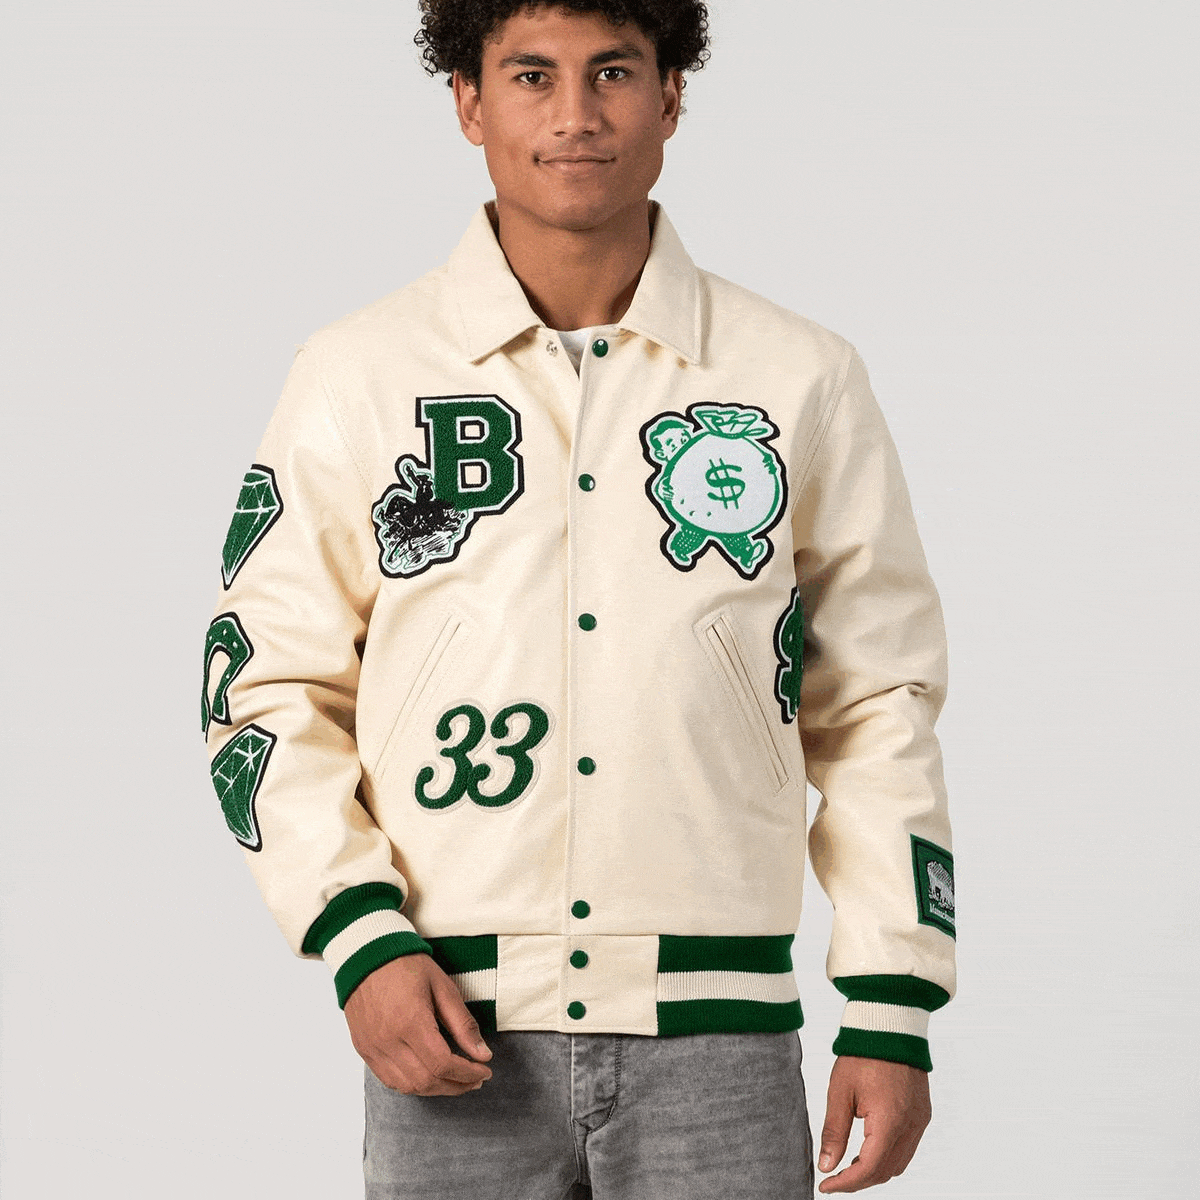 High School Letter Jackets for Athletes, Bands and Club